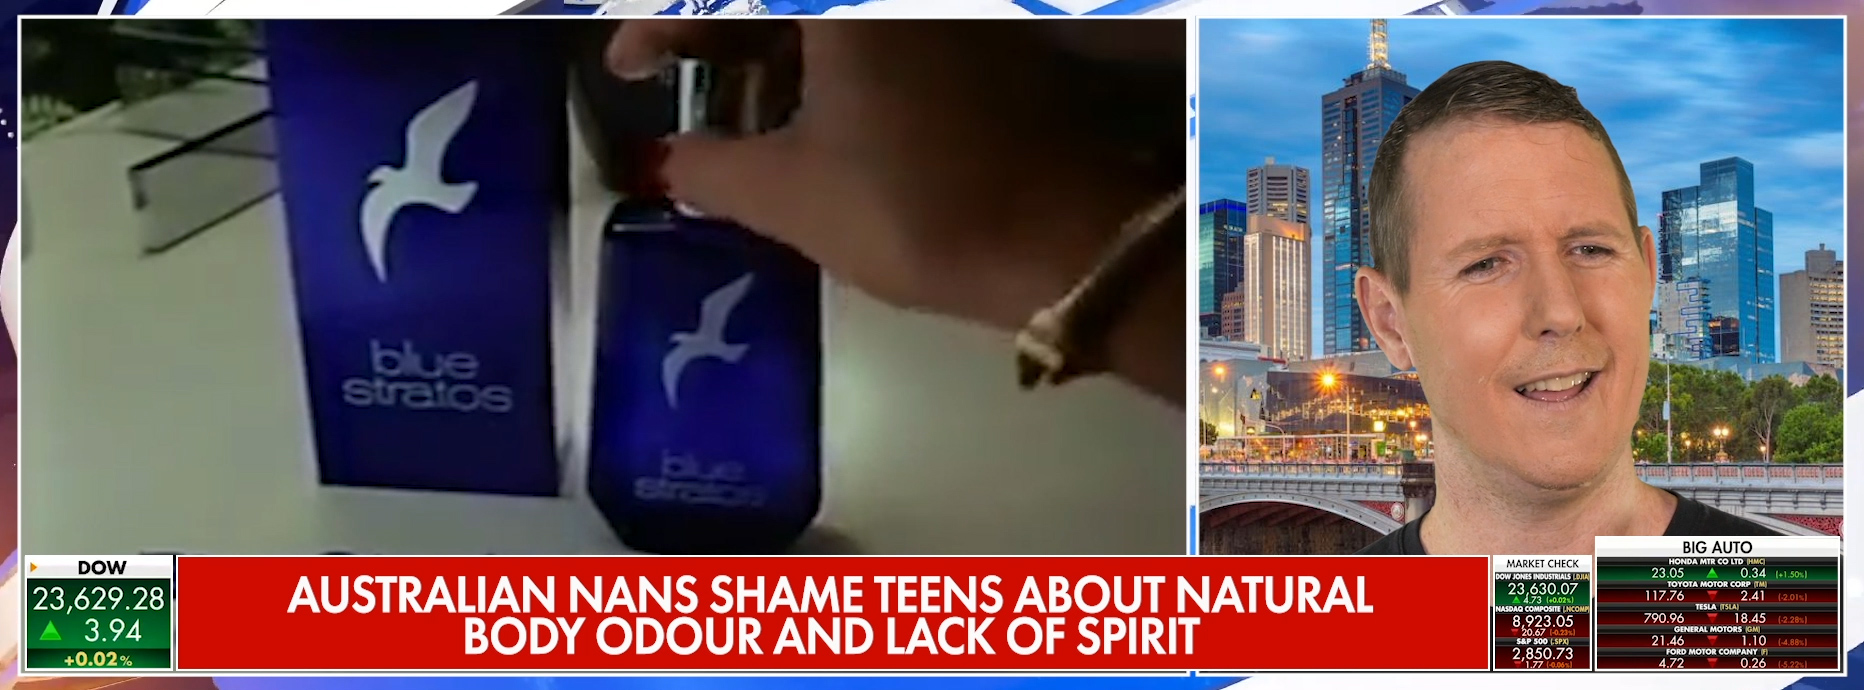 News interview with Blue Stratos cologne on left and artist Matthew Griffin on right. The caption reads 'Australian Nans Shame Teens About Natural Body Odour And Lack Of Teen Spirit'